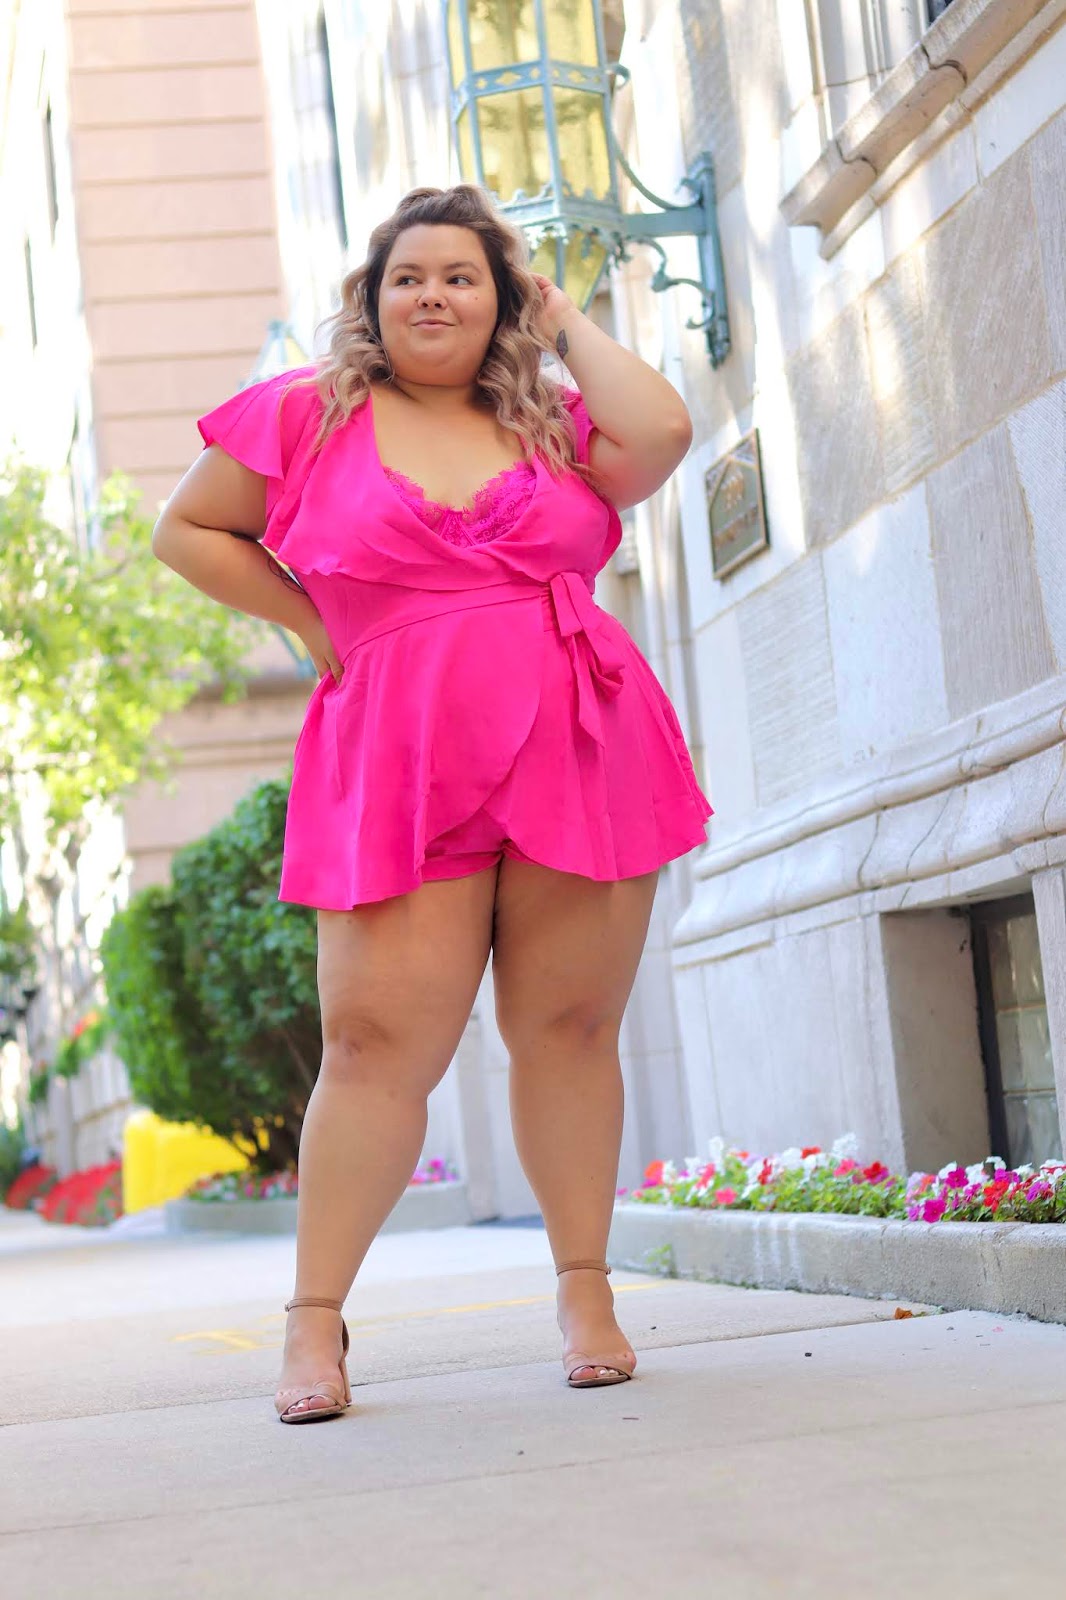 Chicago Plus Size Petite Fashion Blogger, influencer, YouTuber, and model Natalie Craig, of Natalie in the City, reviews Chic Soul's Going International Romper.